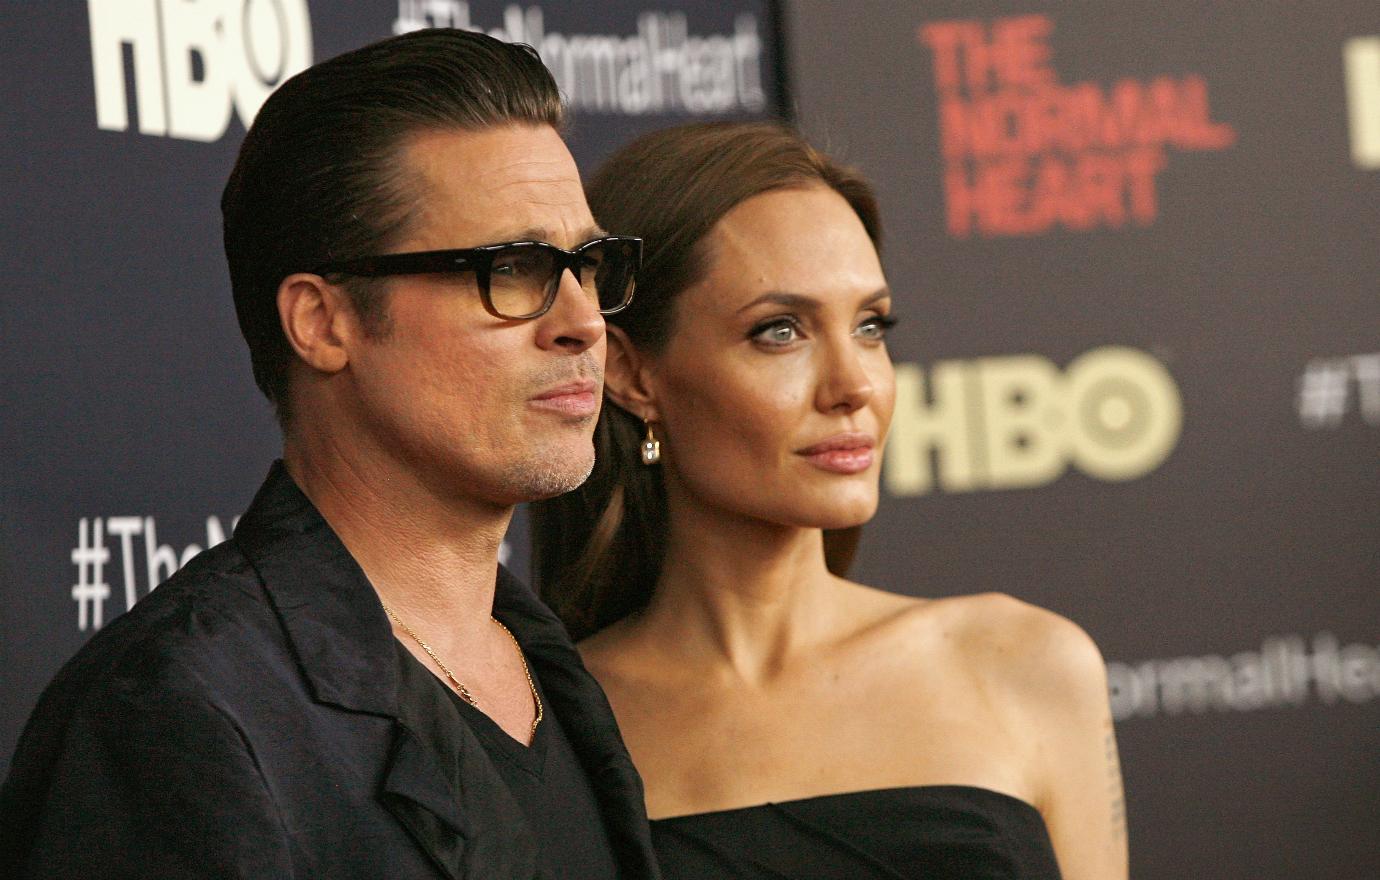 Angelina Jolie Seen For First Time Since Divorce: Pic